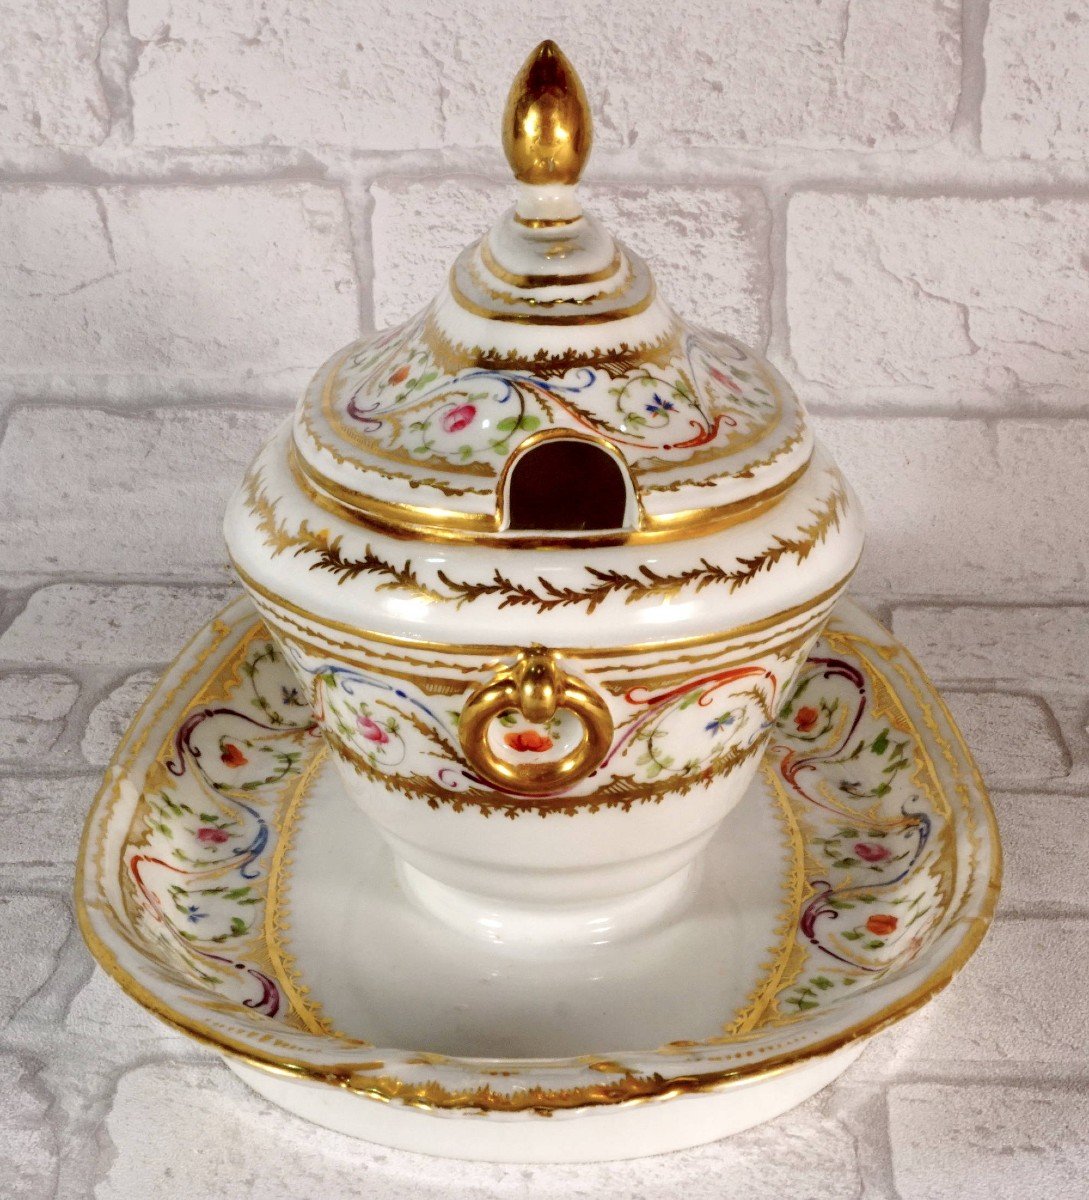 Paris Porcelain Sugar Bowl And Its Lid - Attributed To The Manufacture Du Duc d'Angouleme-photo-1